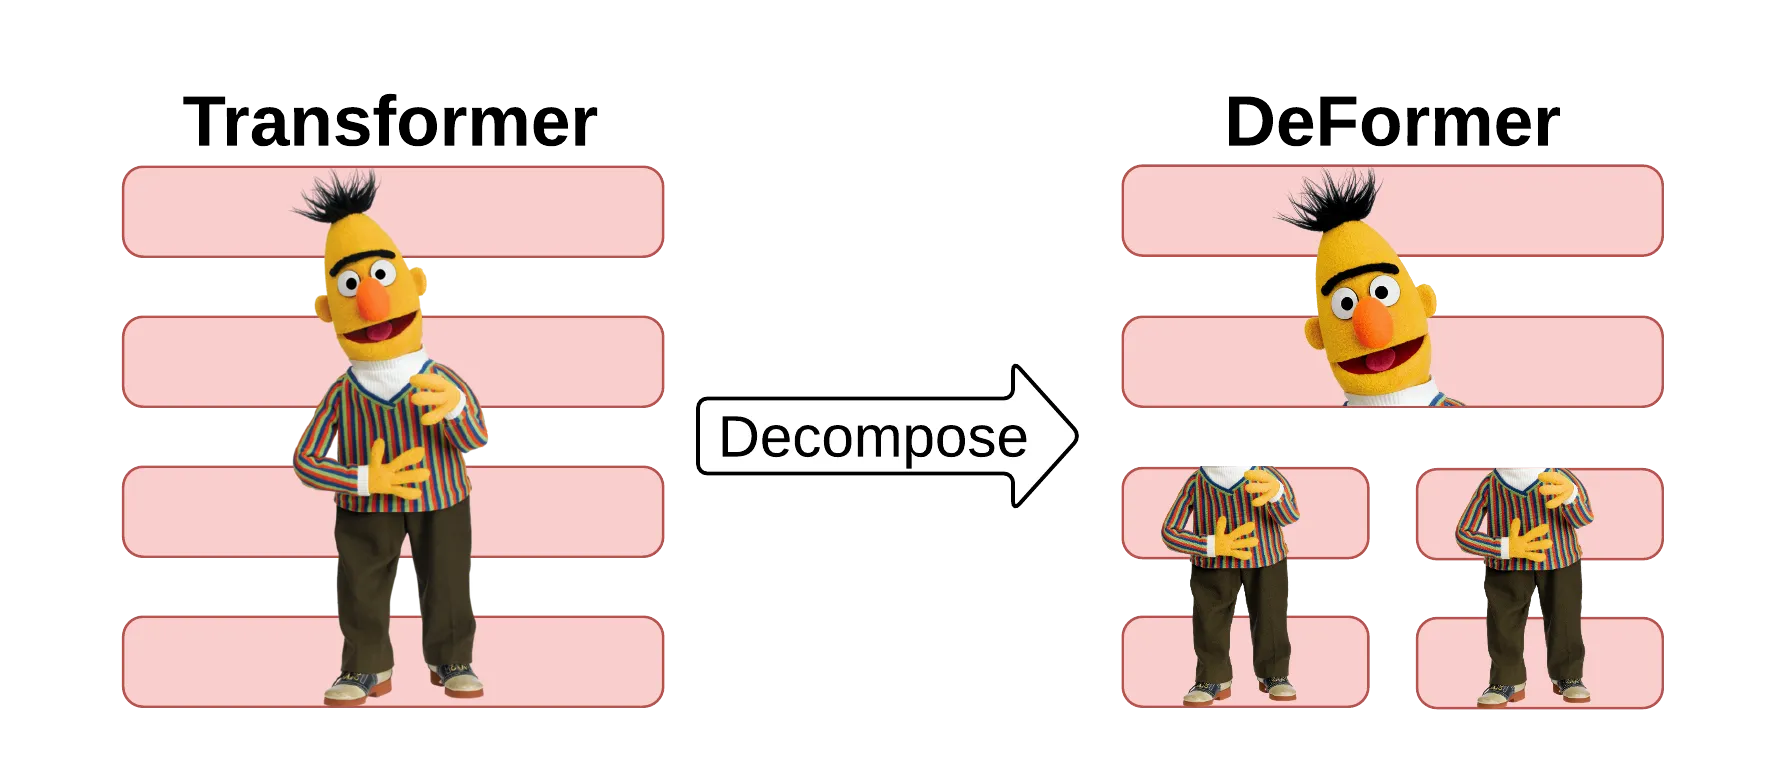 "Deformer-decomposed-from-transfomer